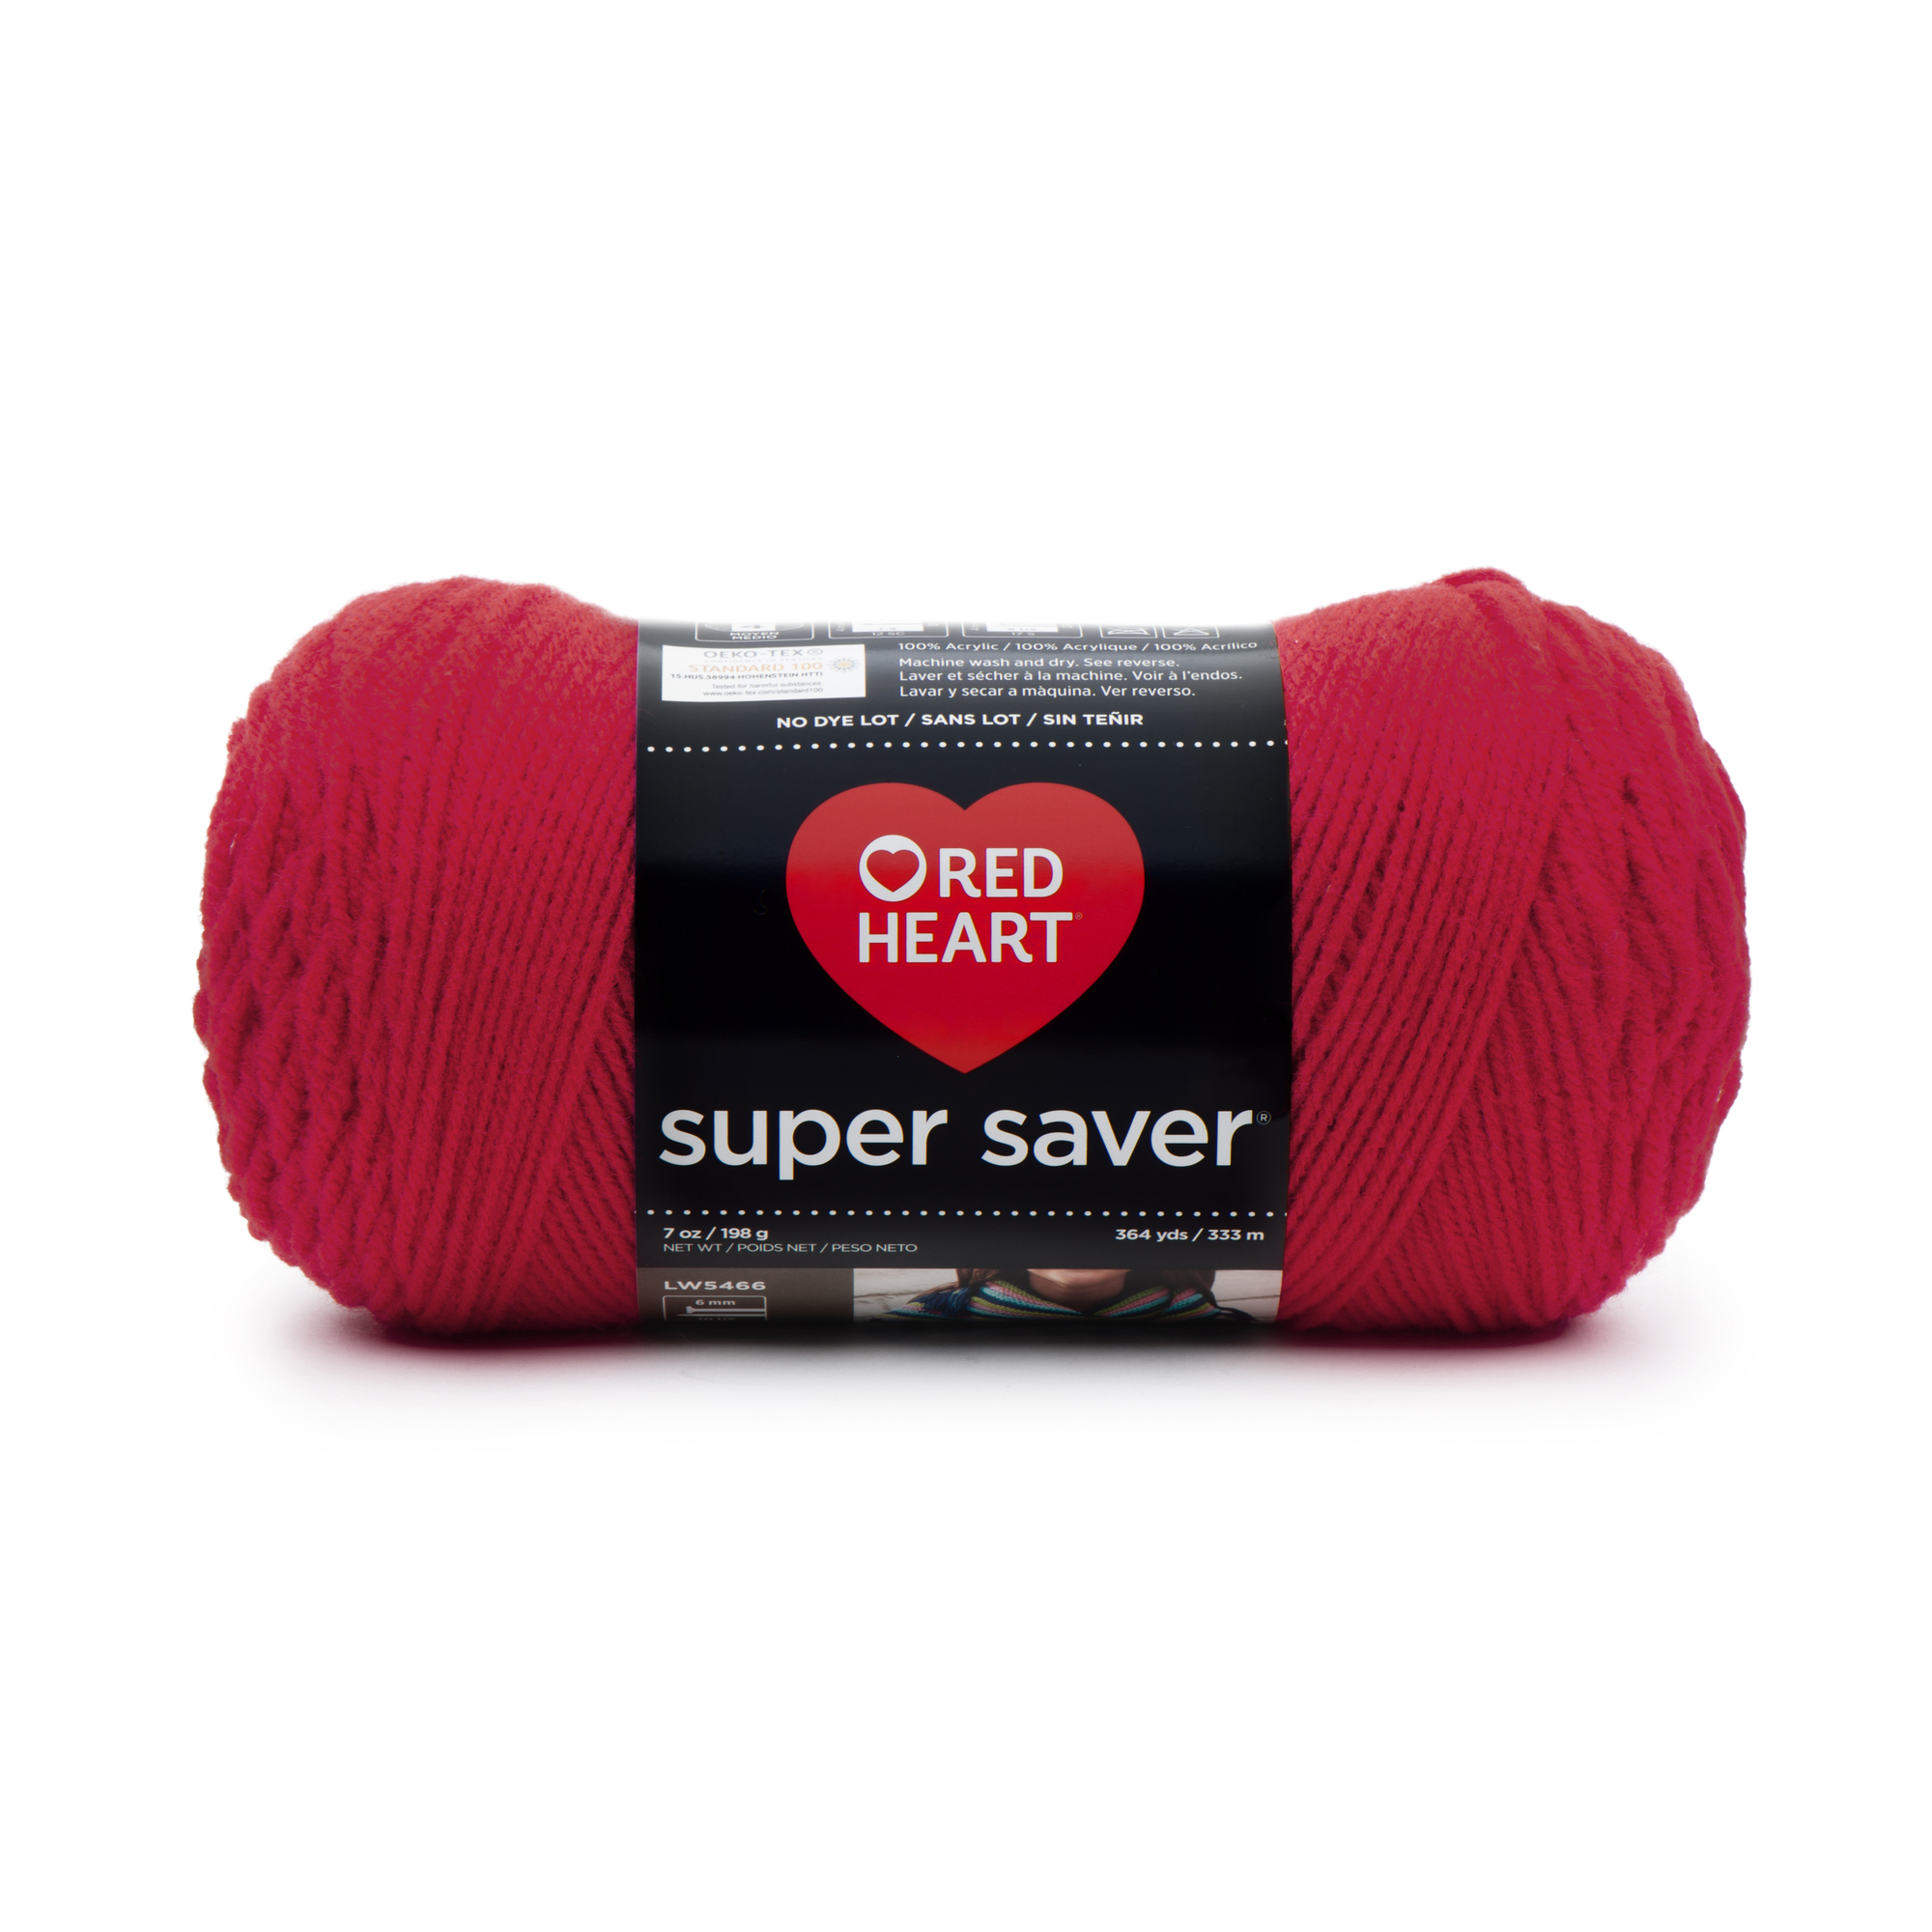 Red Heart Super Saver Acrylic 7 Ounce Skein Economy Hot Red Yarn, 1 Each - image 1 of 12